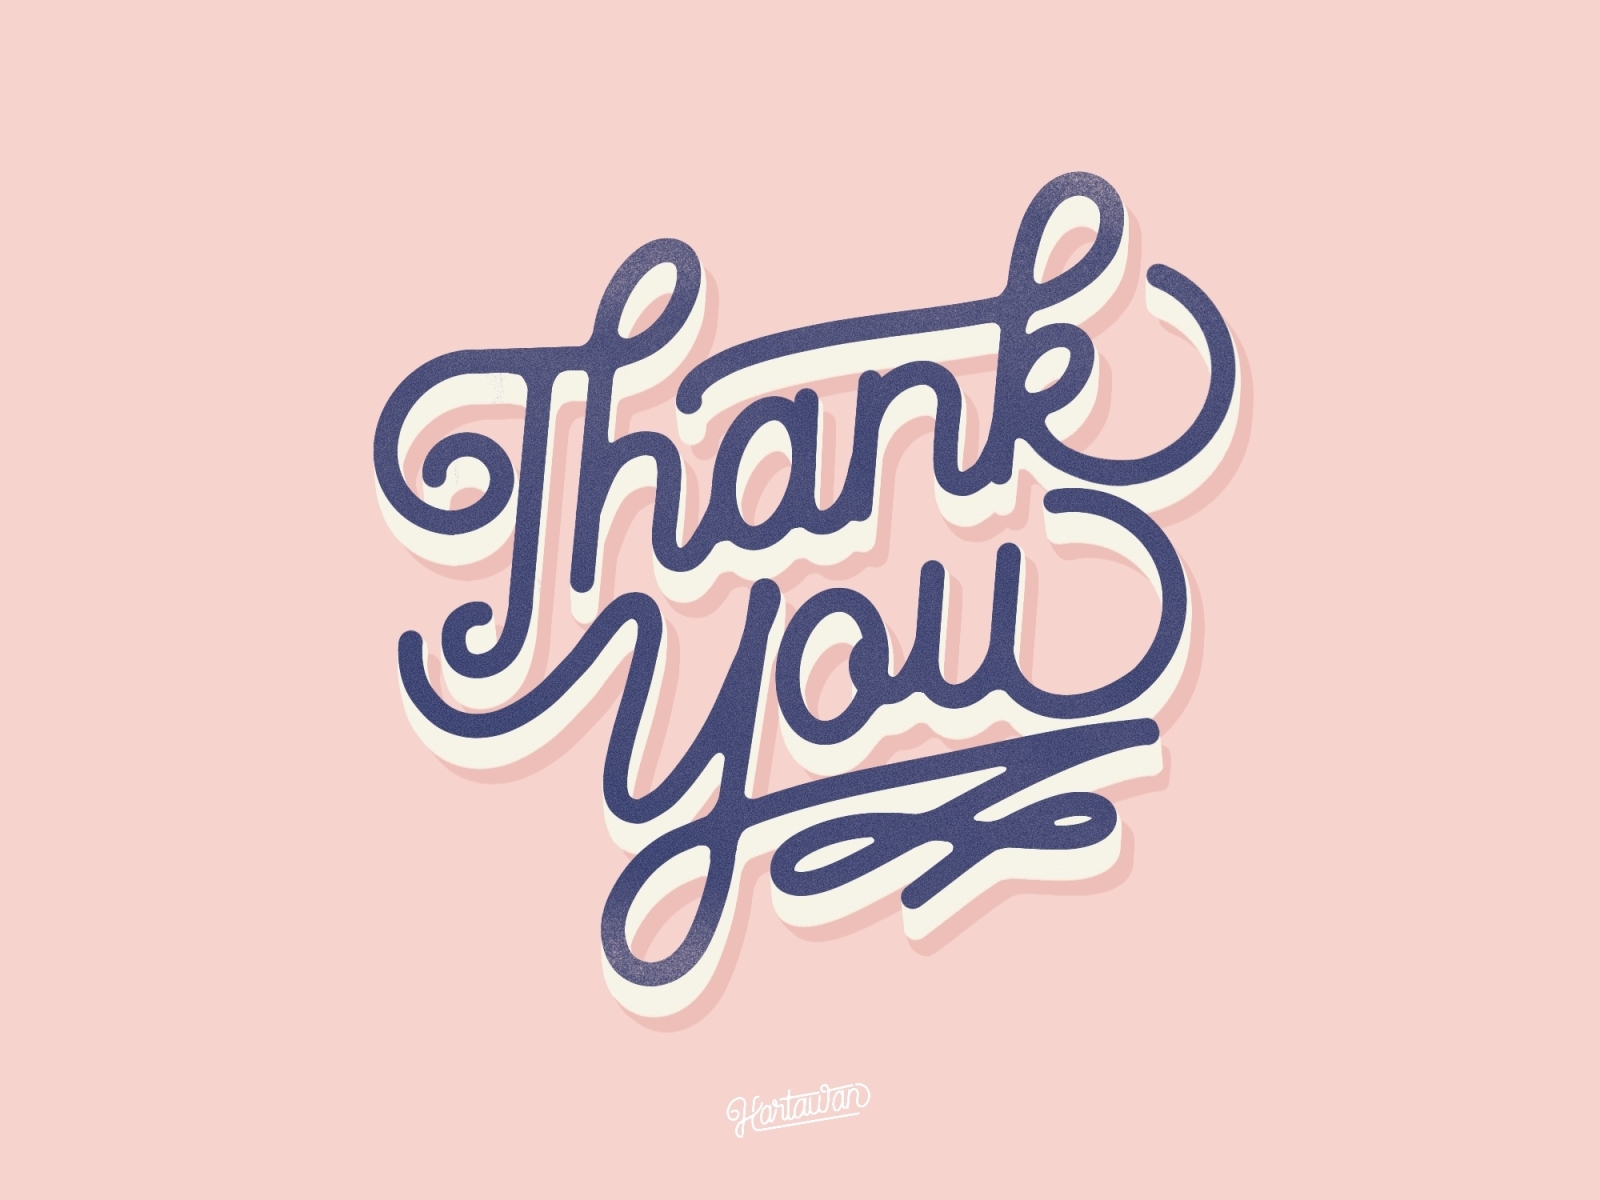 Thank You by Letter By Hartawan on Dribbble